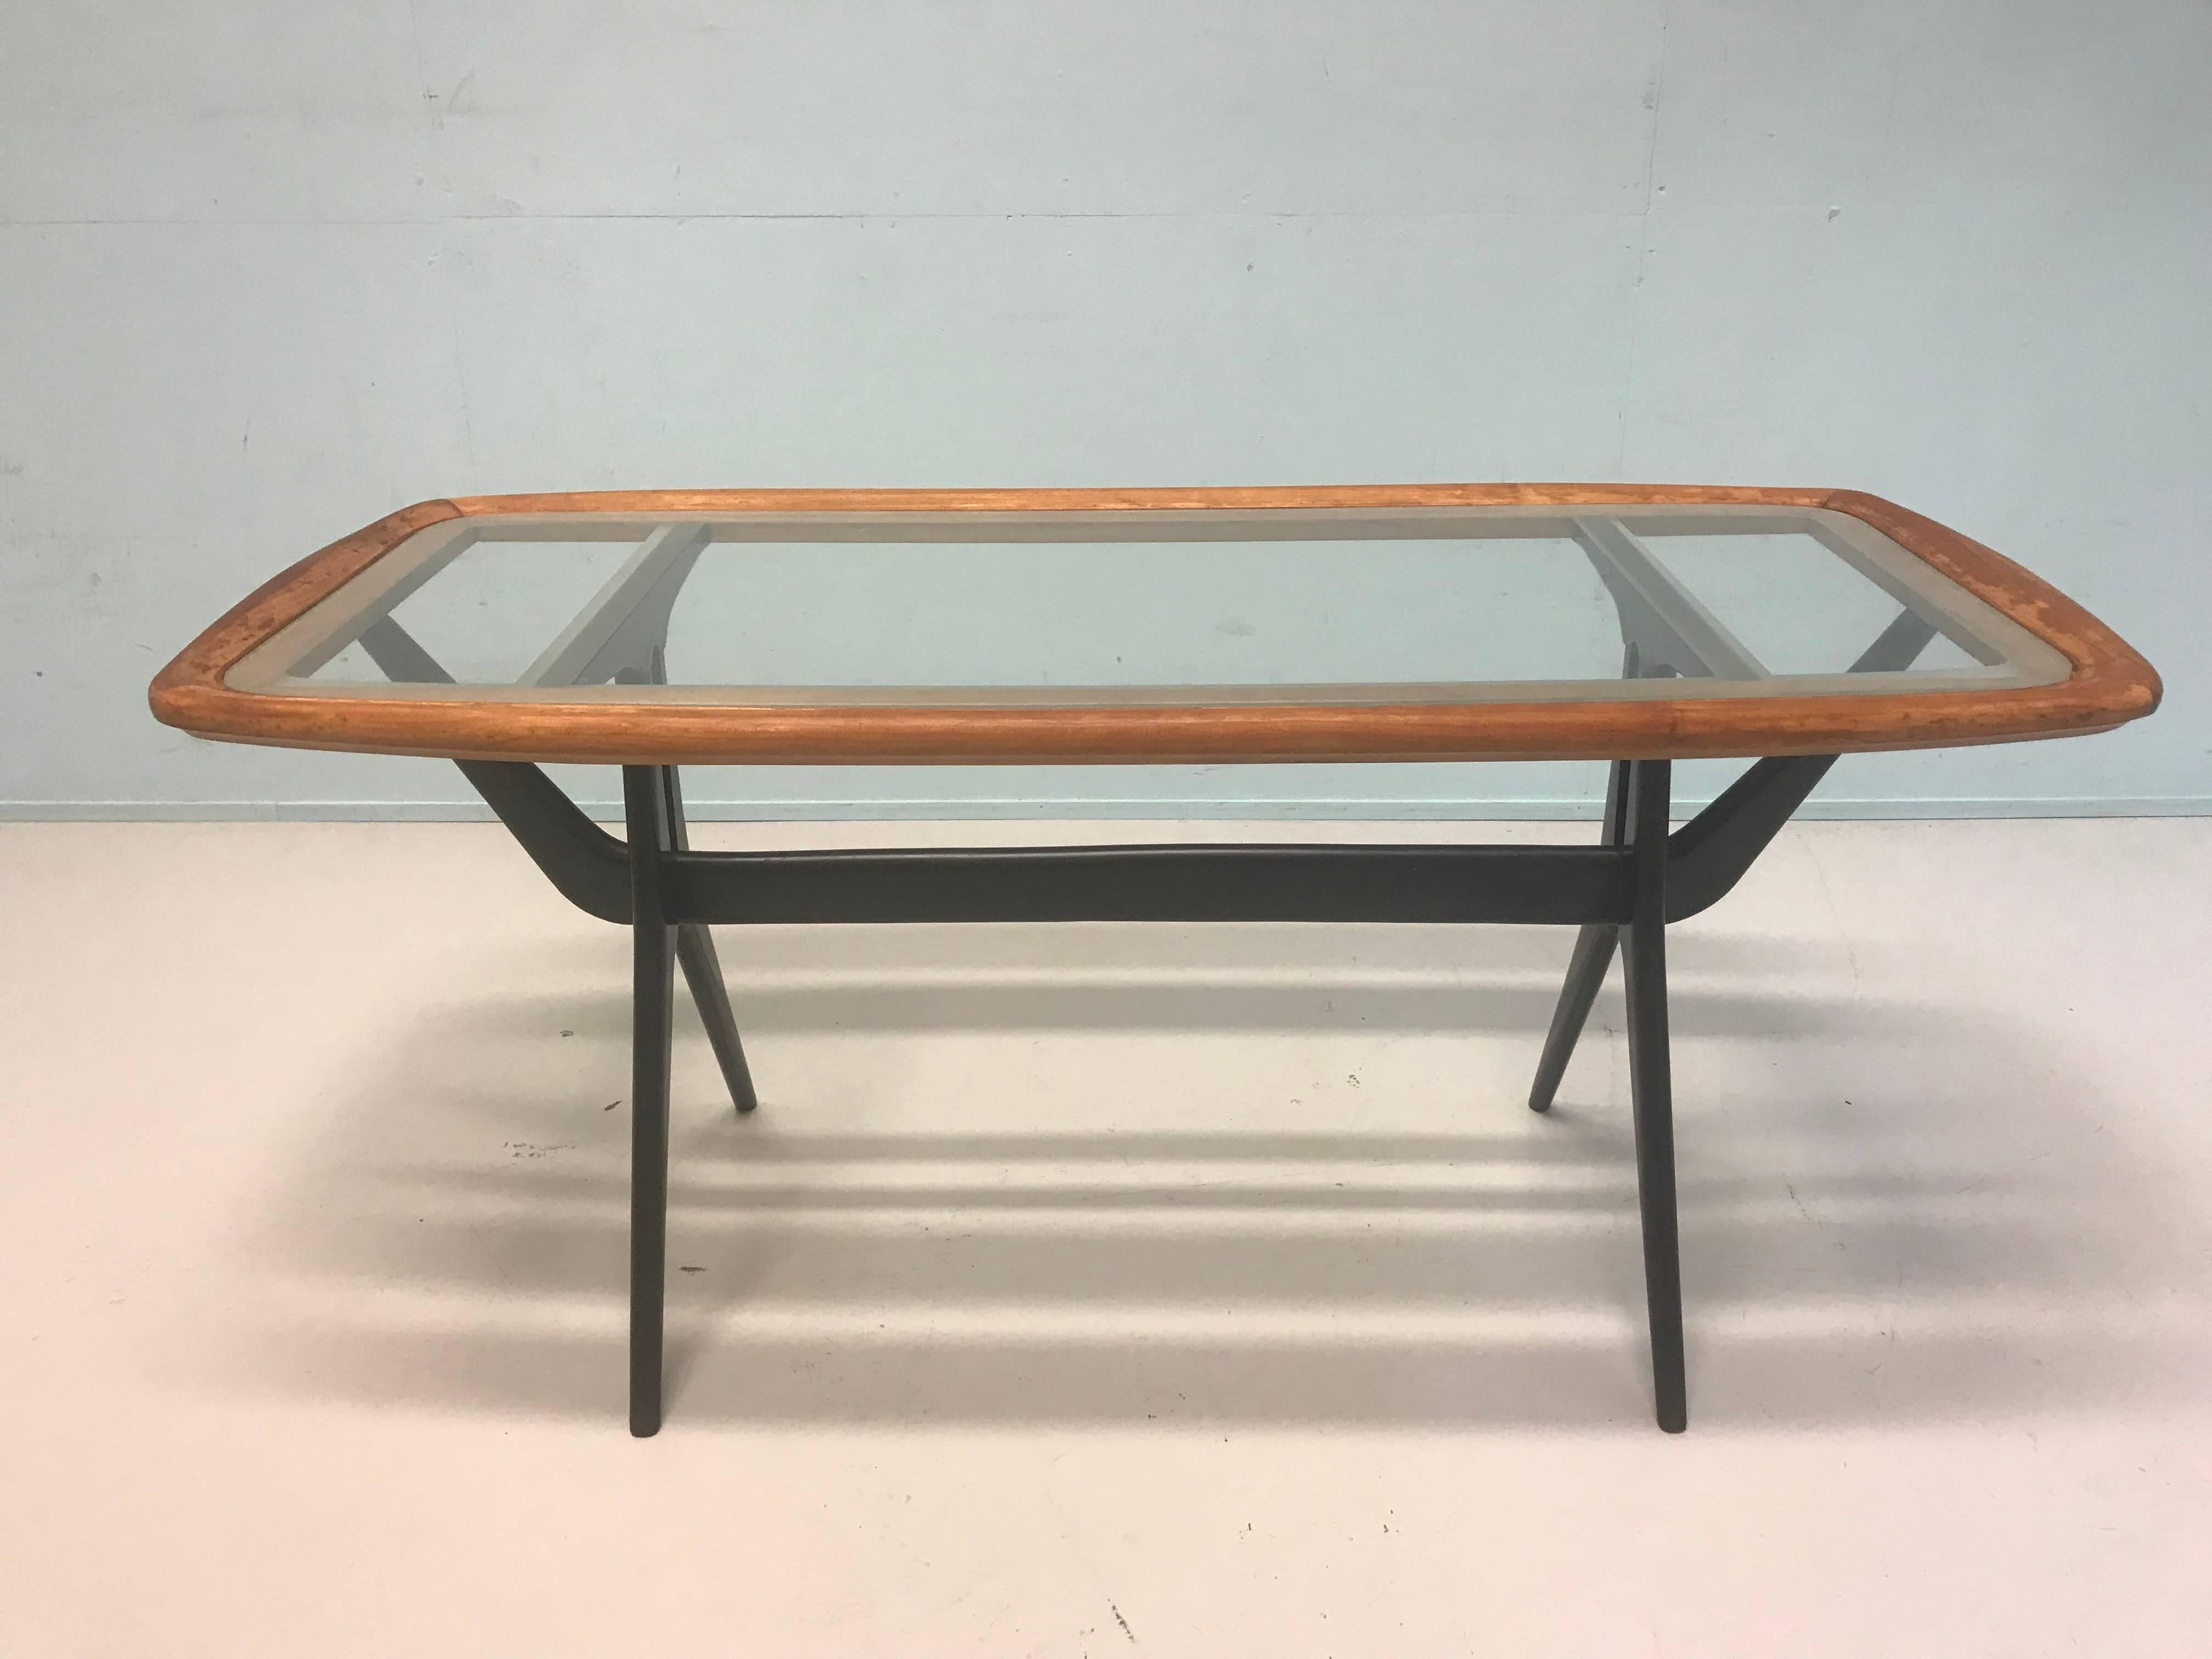 Coffee table by Cesar Lacca for Cassina from the 1950s-1960s.
Rare coffee table made of cherrywood with glass top and original black base.
In a good vintage condition.
Measurements:
109 cm W, 49.5 cm D, 49.5 cm H.